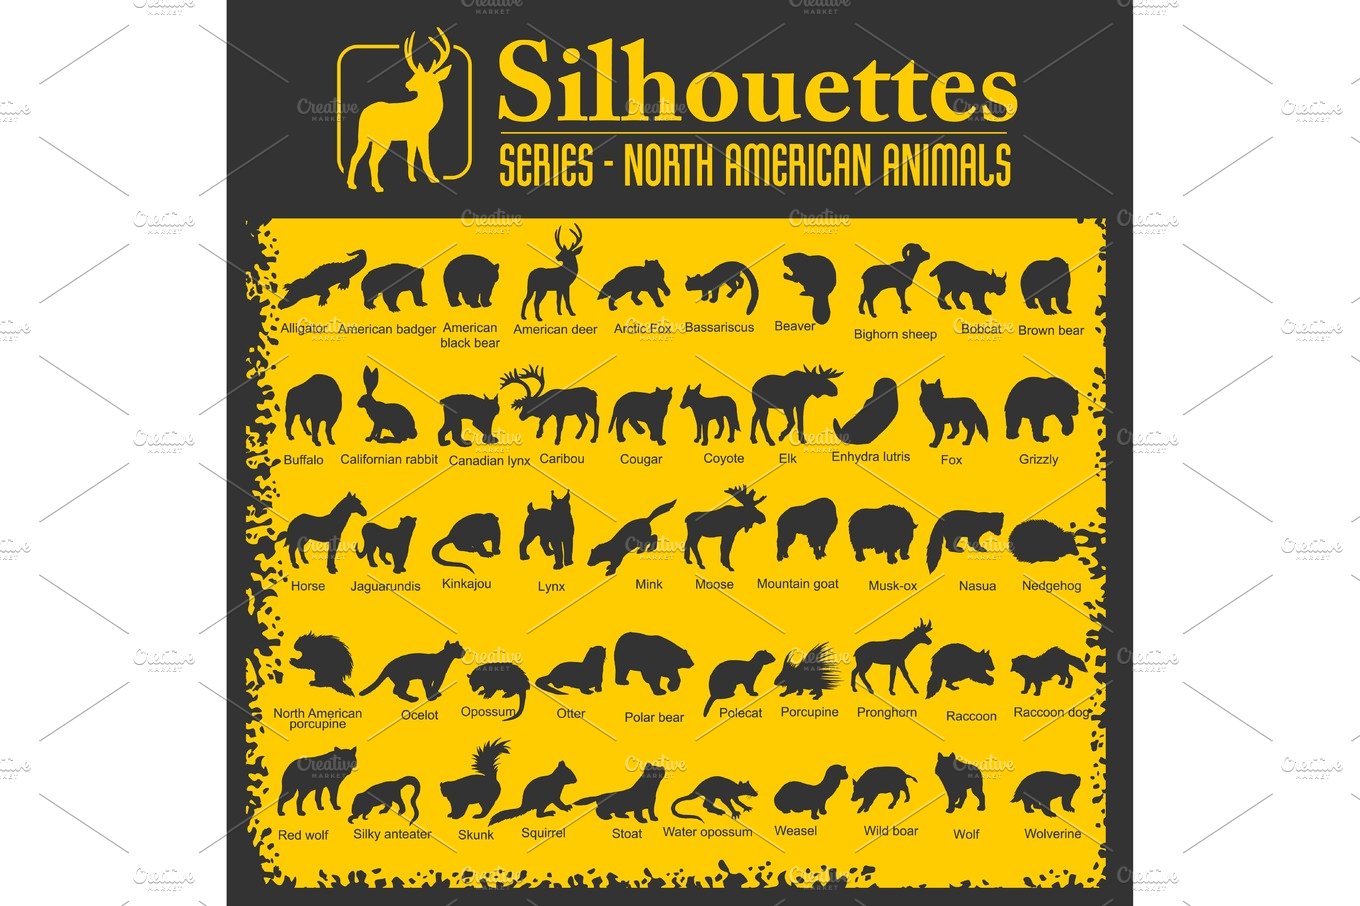 Silhouettes - North American animals. cover image.